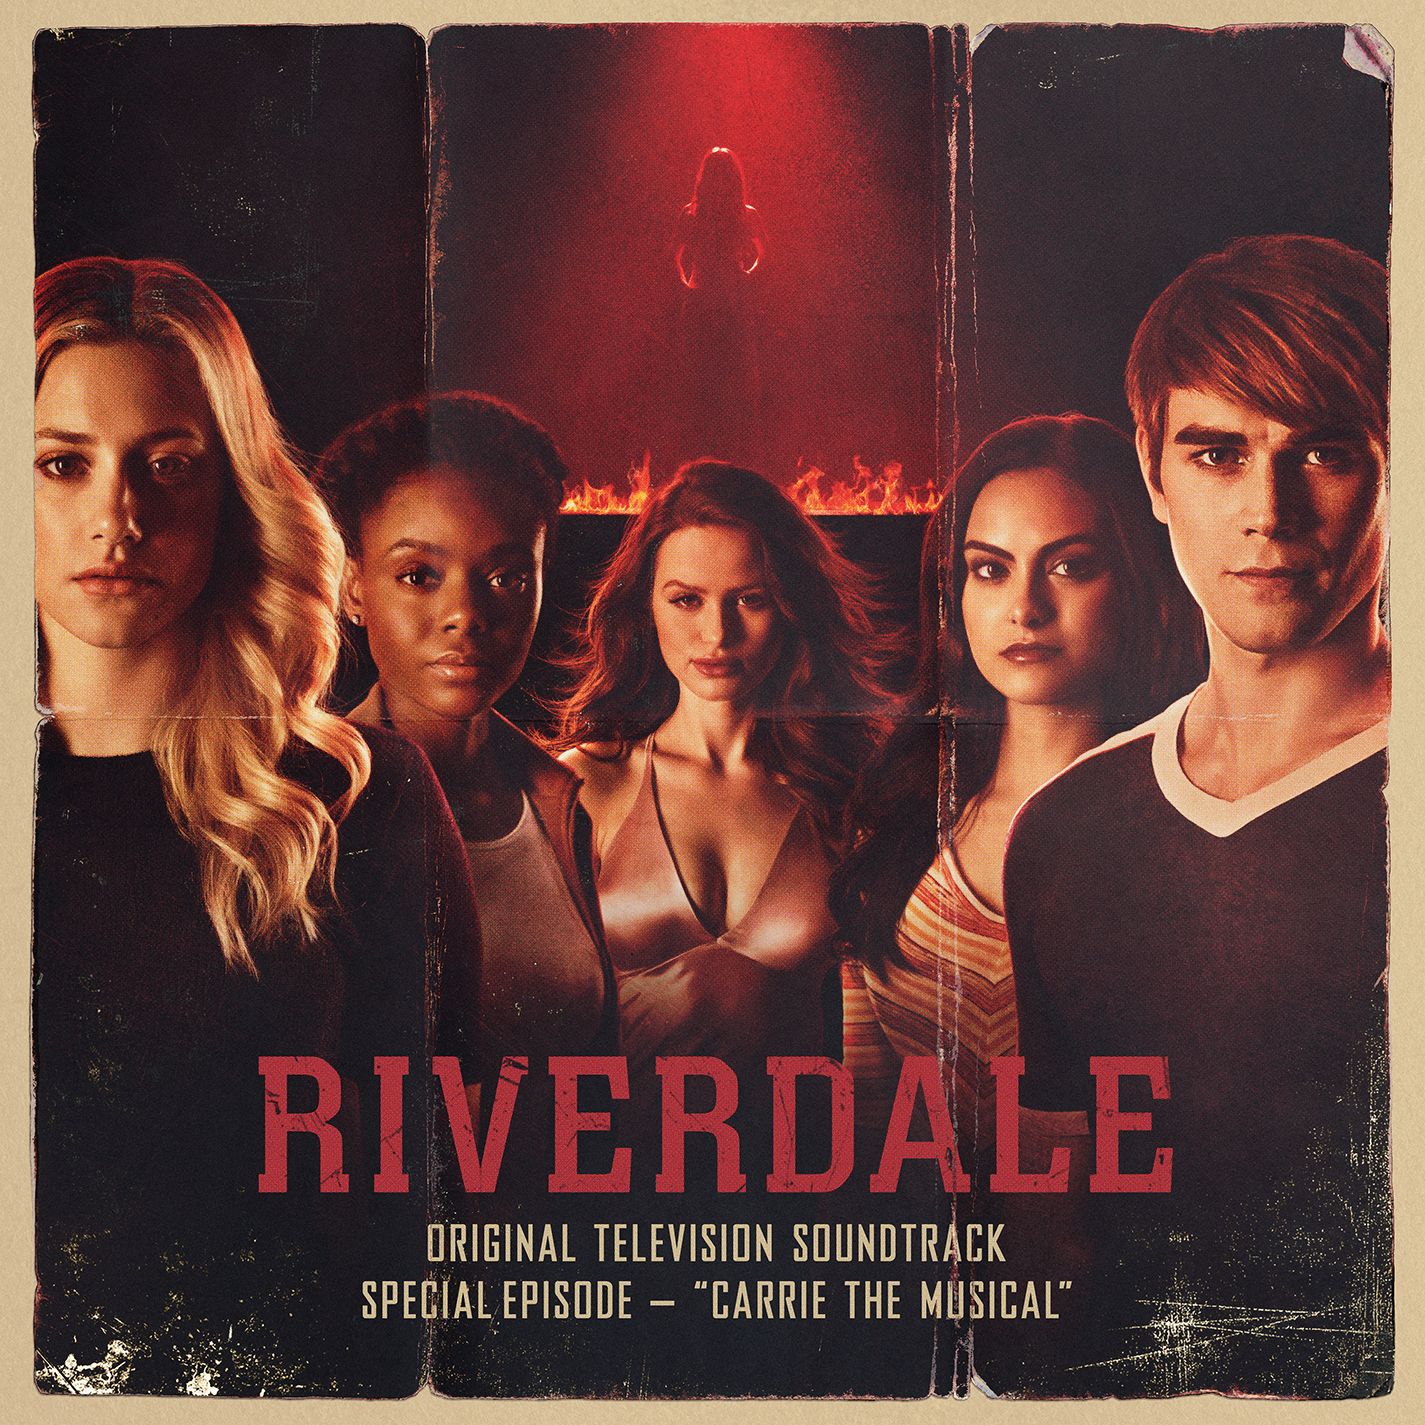 Riverdale: Special Episode - Carrie the Musical (Original Television Soundtrack) cover art